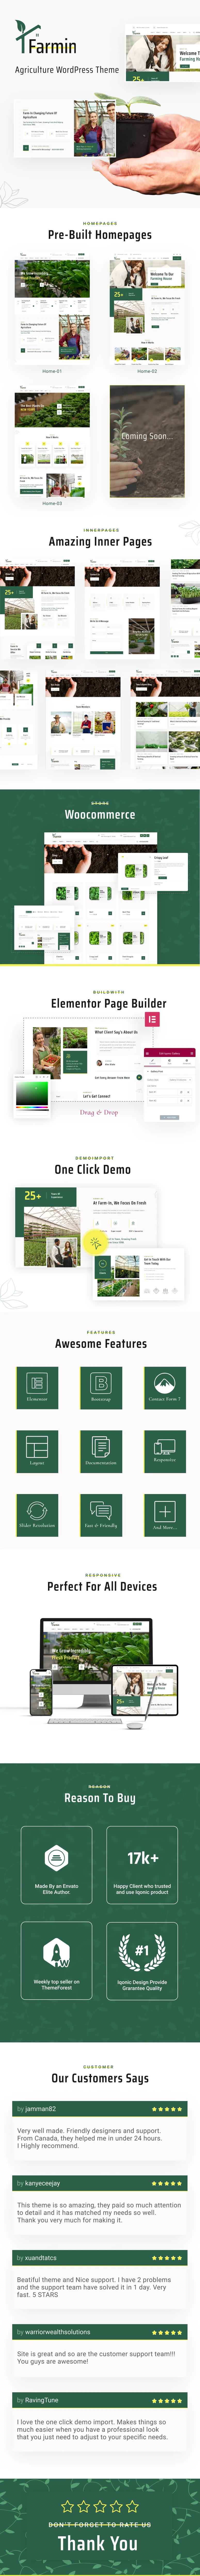 Farmin - Agriculture and Indoor Farming WooCommerce Theme - 1